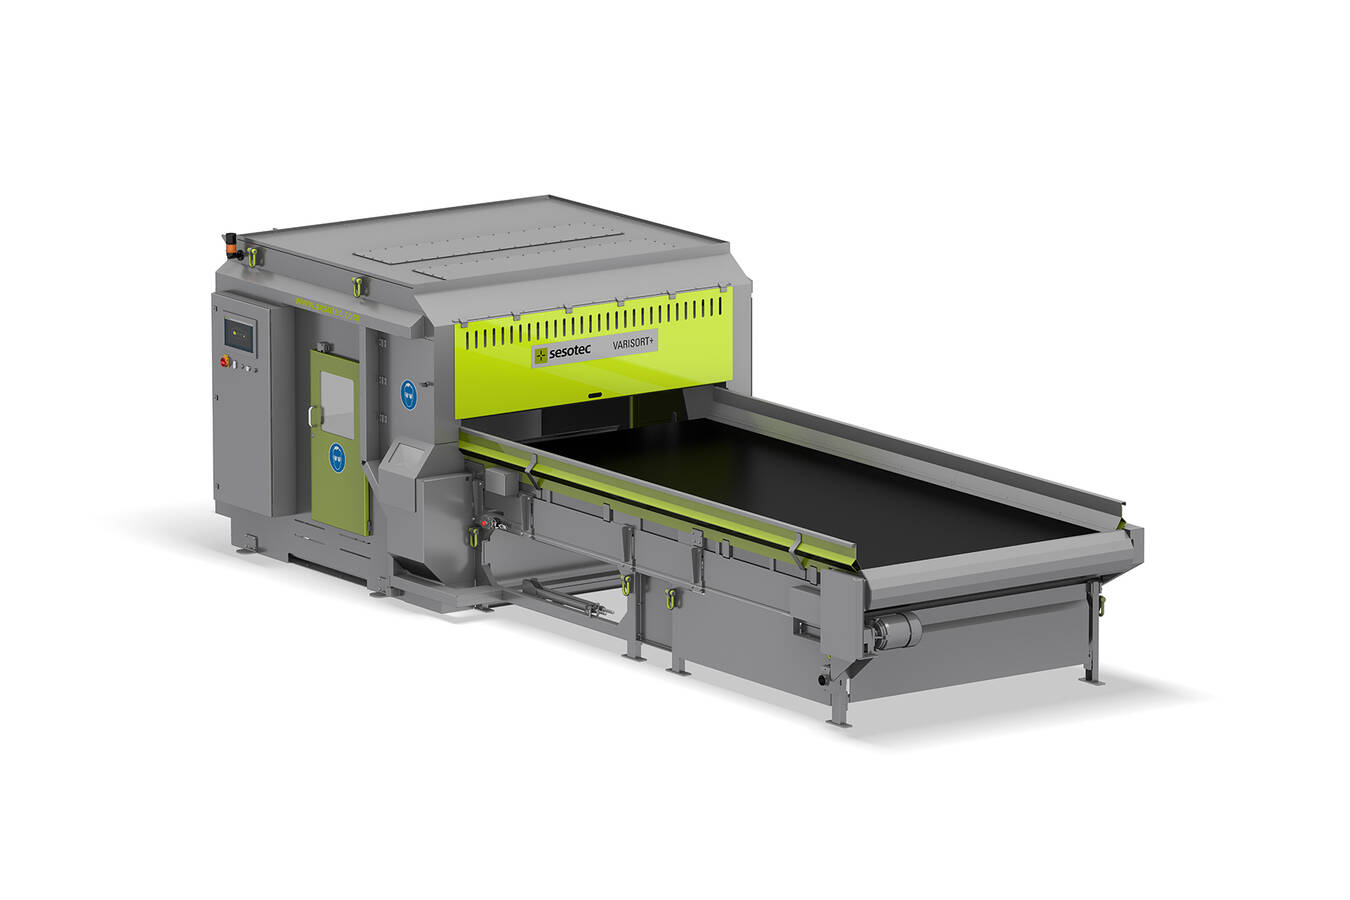 Profitably closing the plastics cycle The new Varisort+ sorting system from Sesotec combines sustainability and profitability